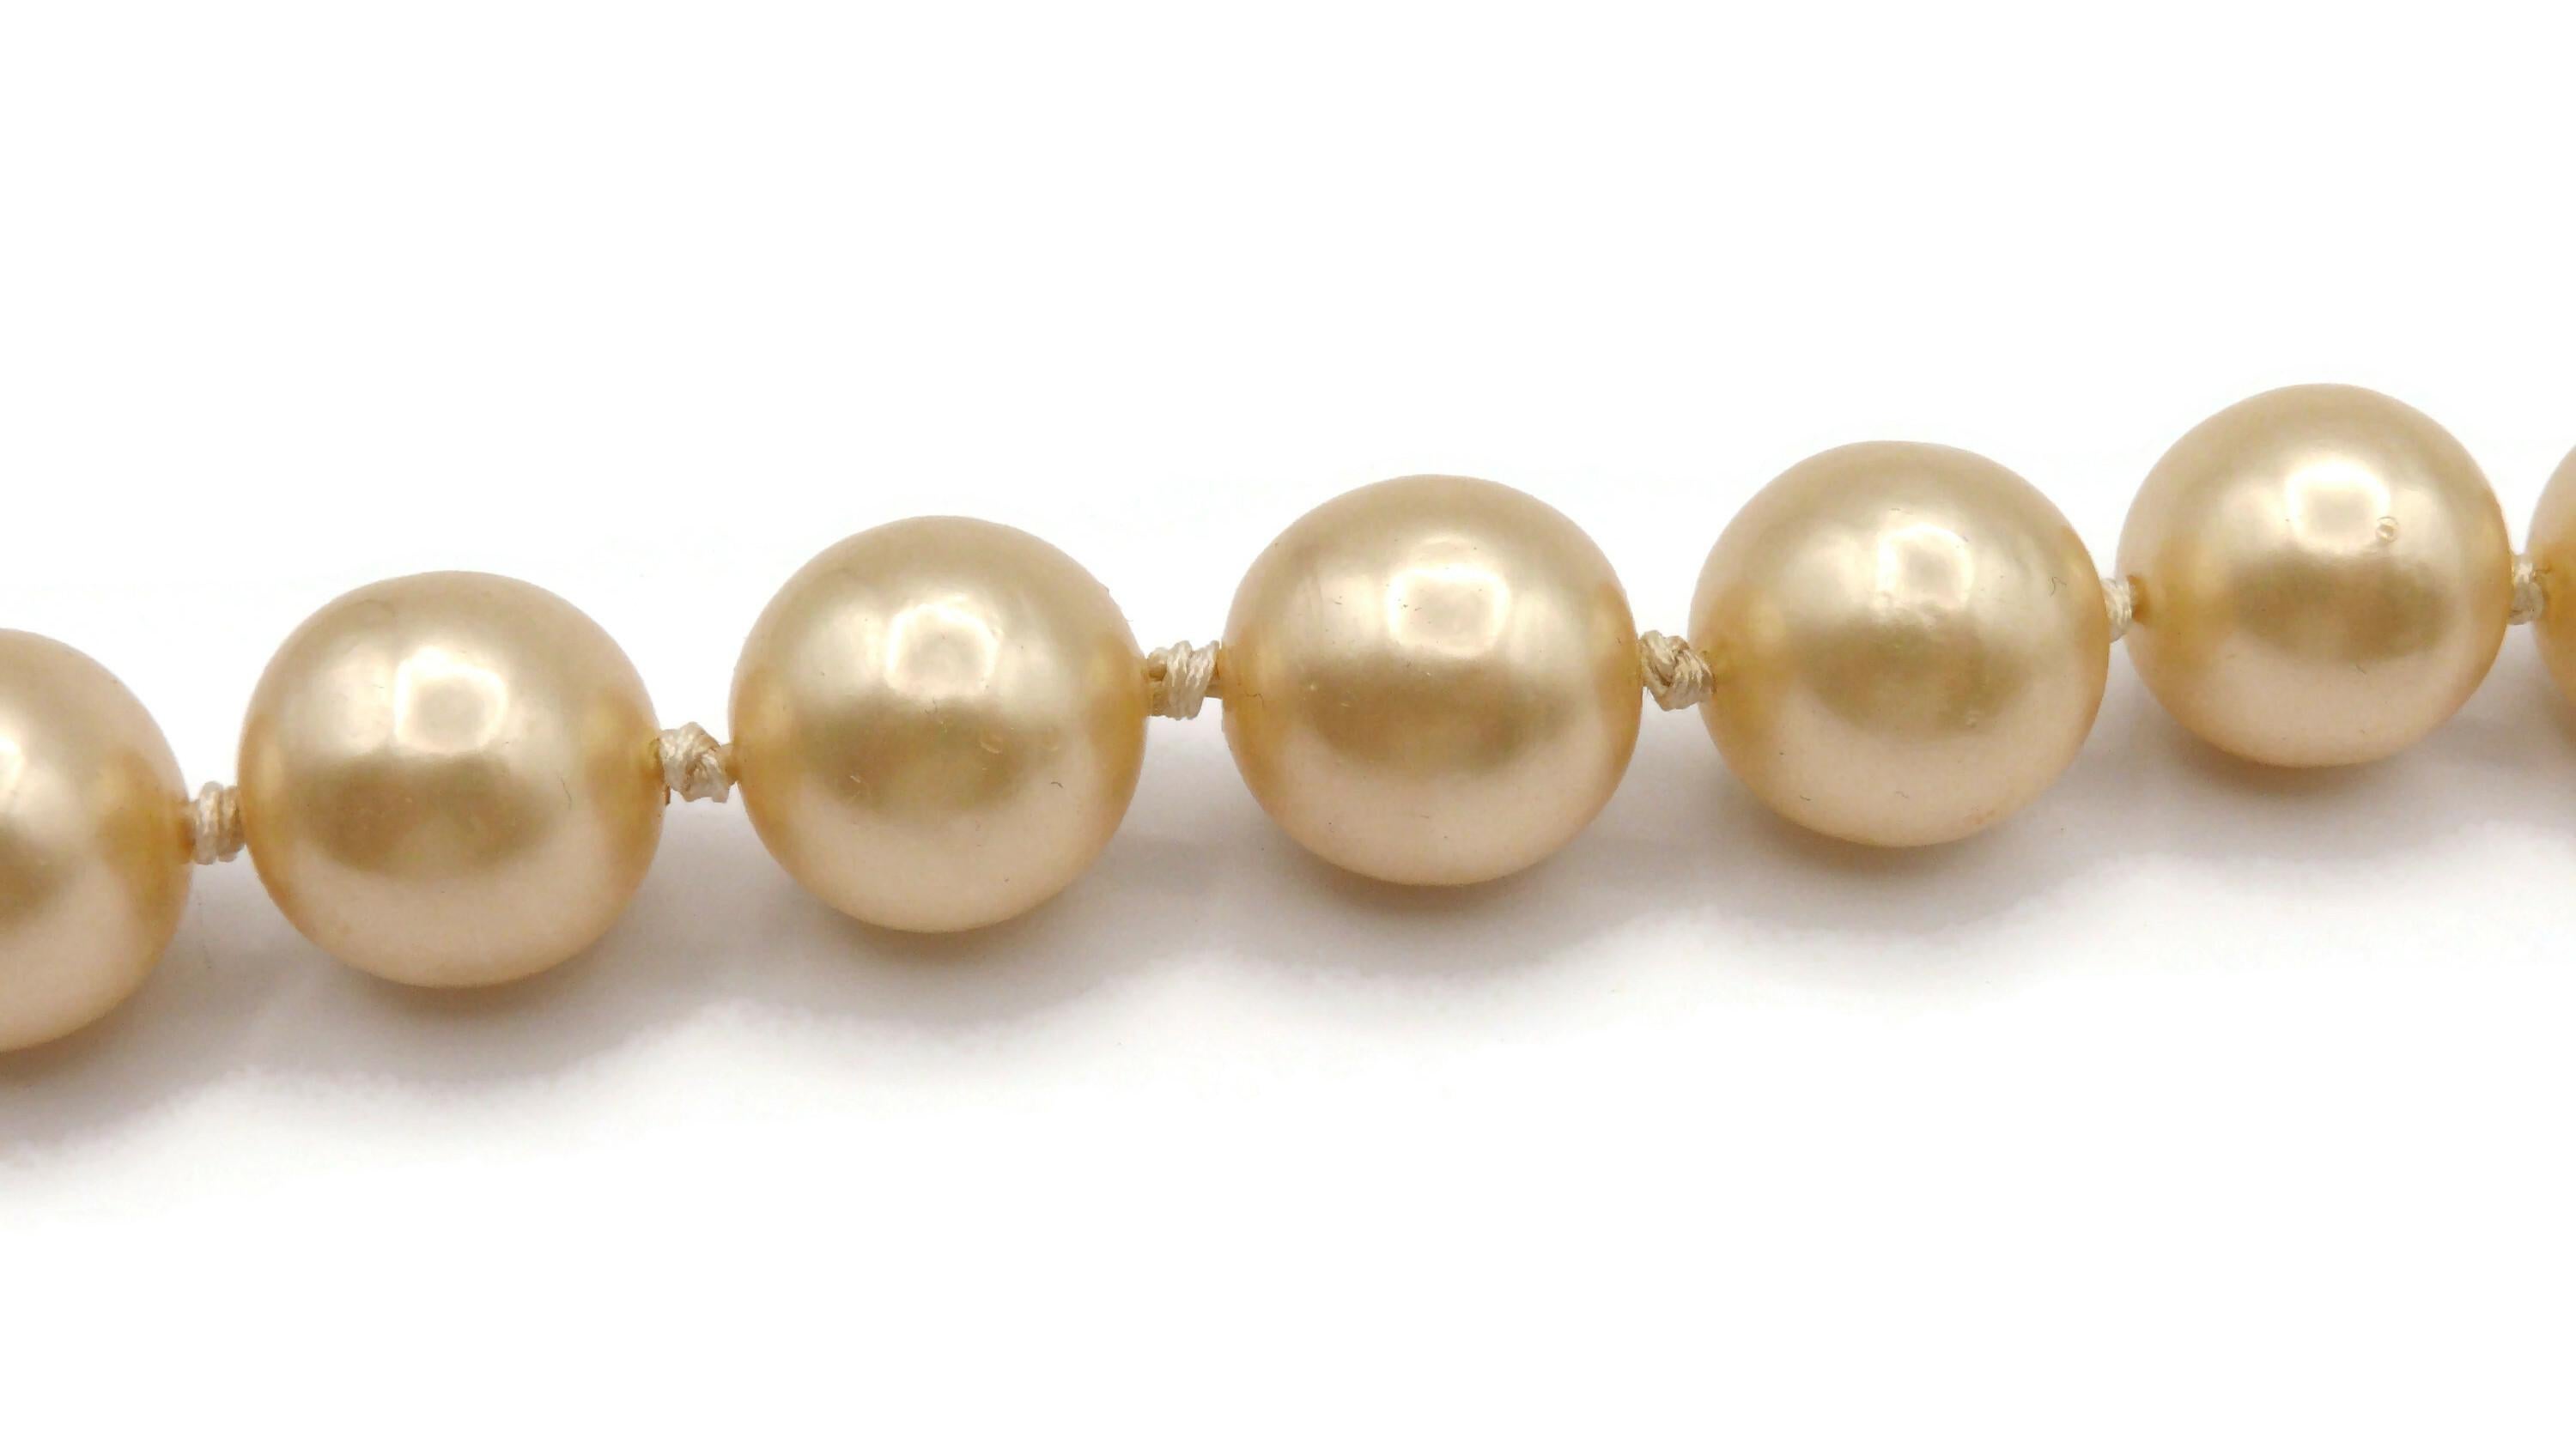 CHANEL by KARL LAGERFELD Vintage Large Faux Pearl Necklace, 1993 For Sale 2